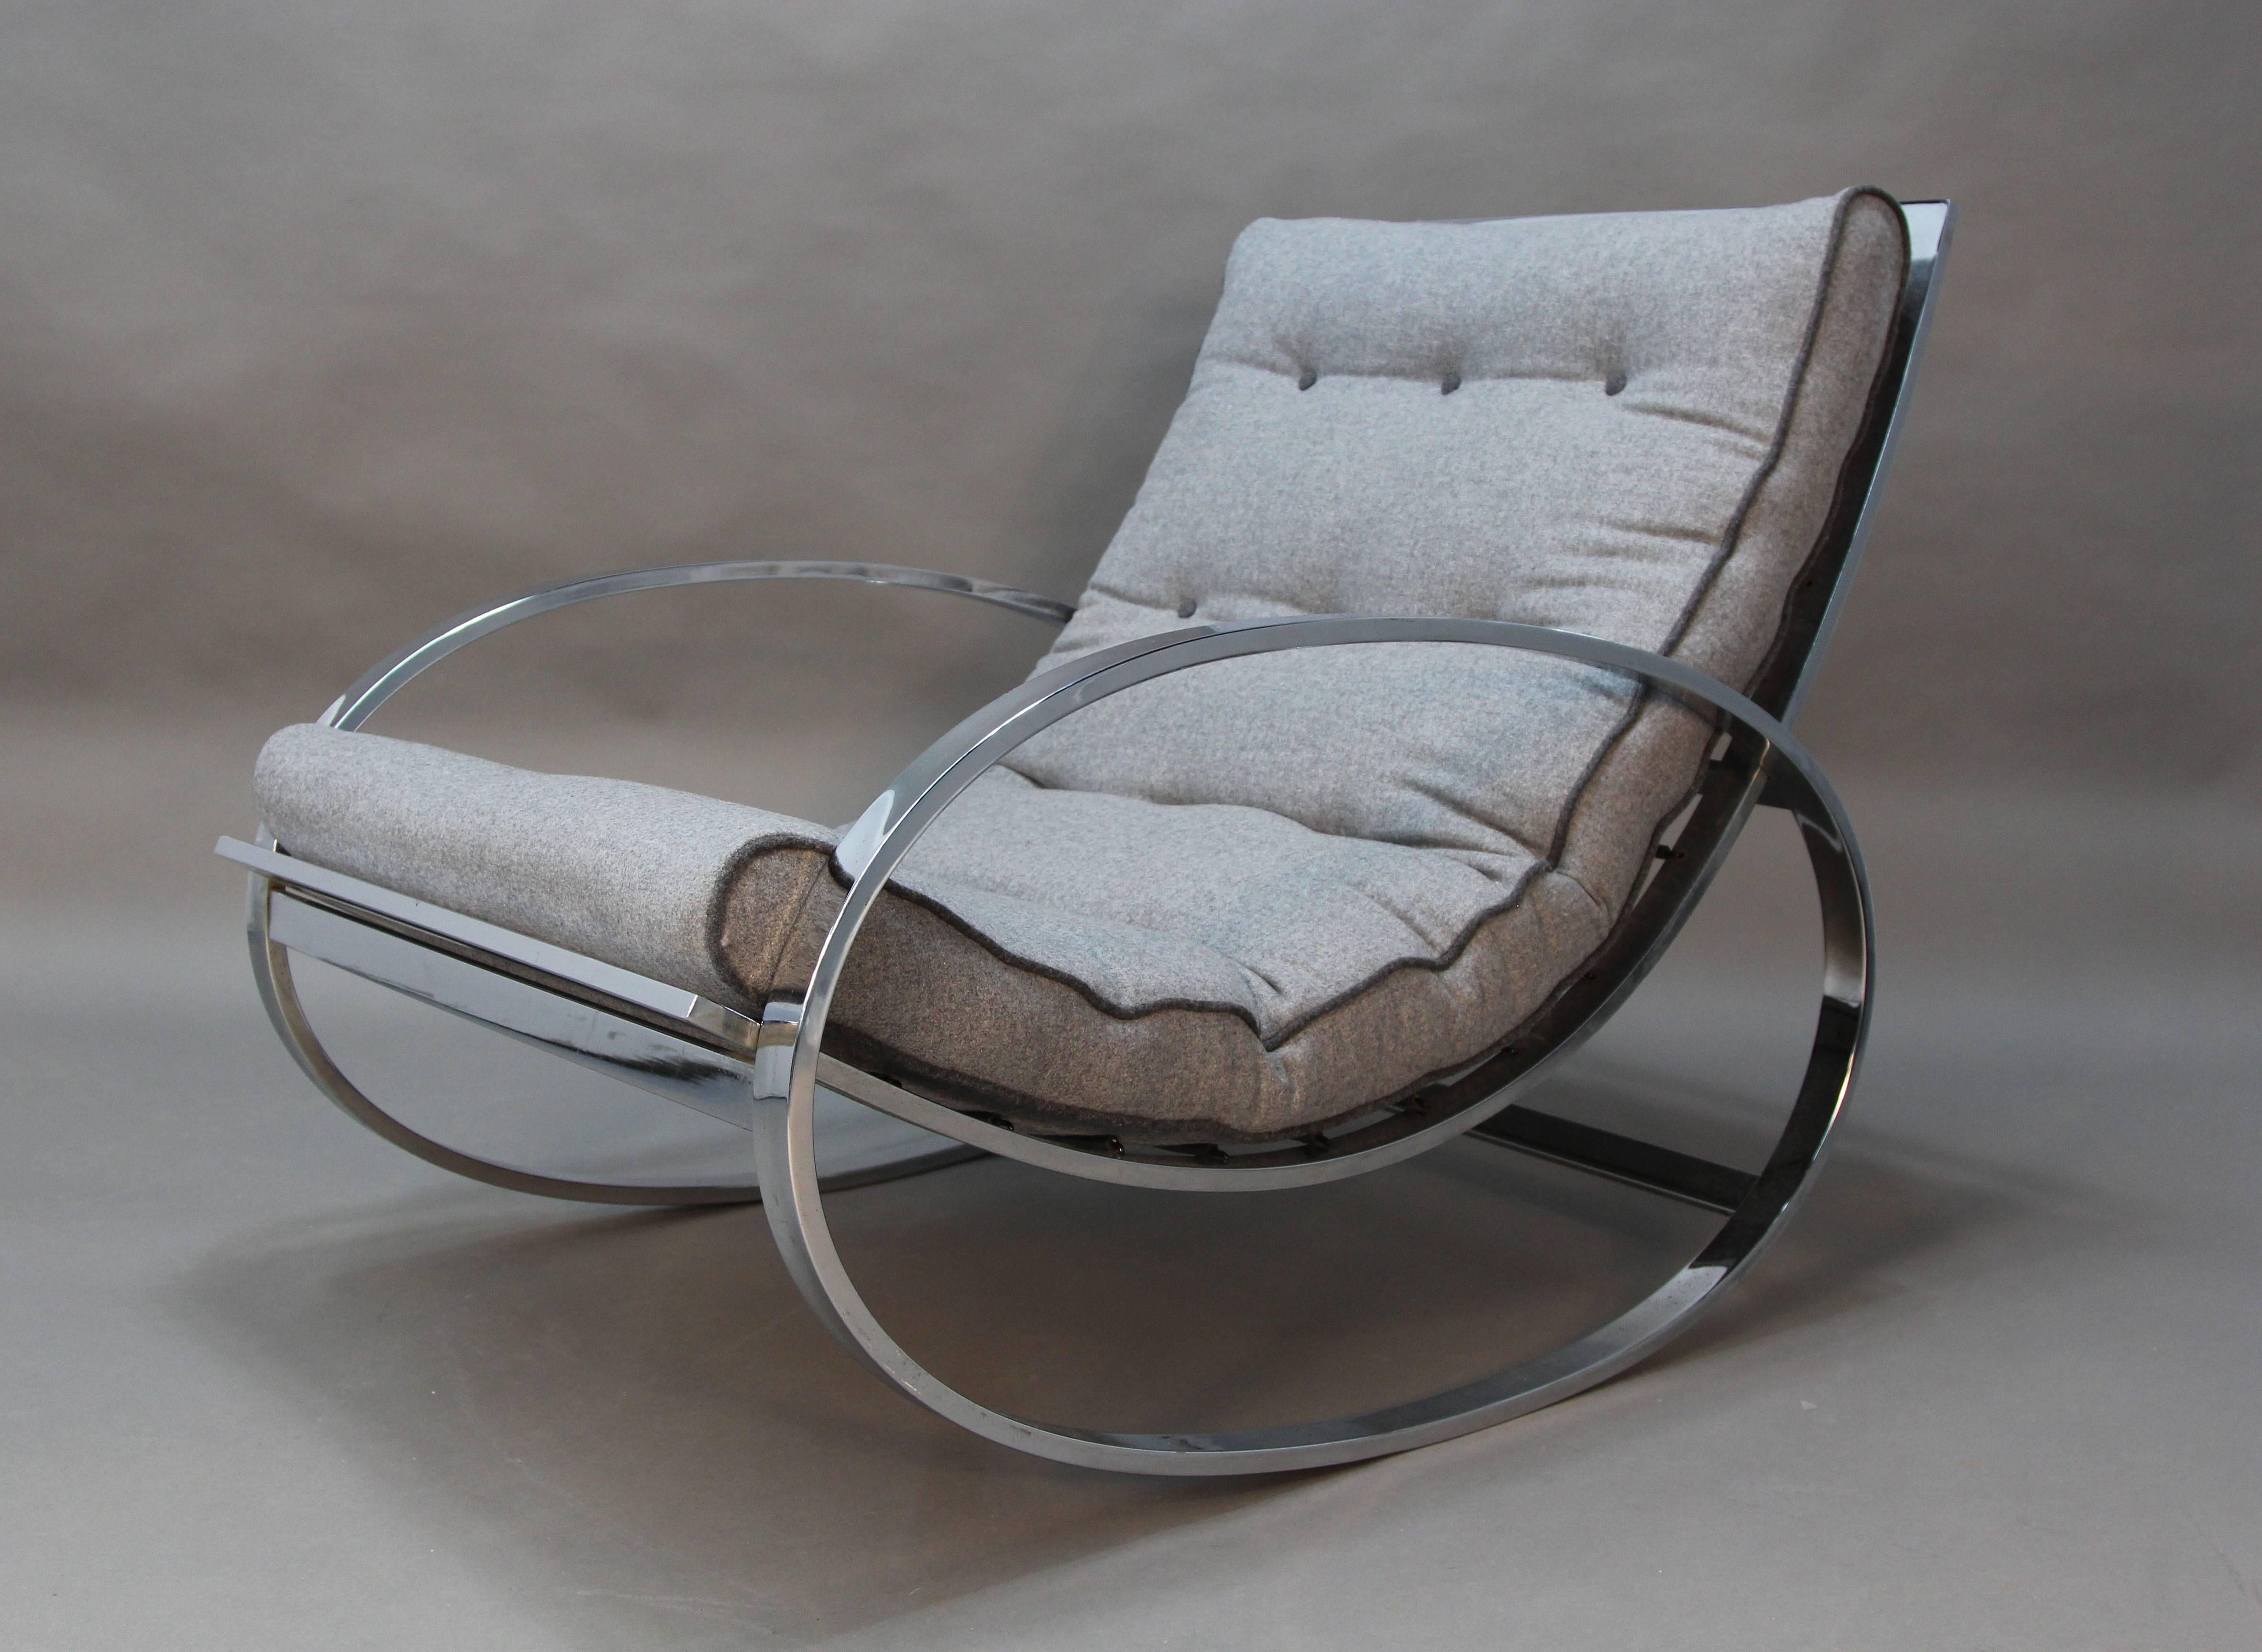 Amazing chrome frame Milo Baughman rocker with matching ottoman. Newly upholstered in grey wool with contract dark grey piping and button tufting.